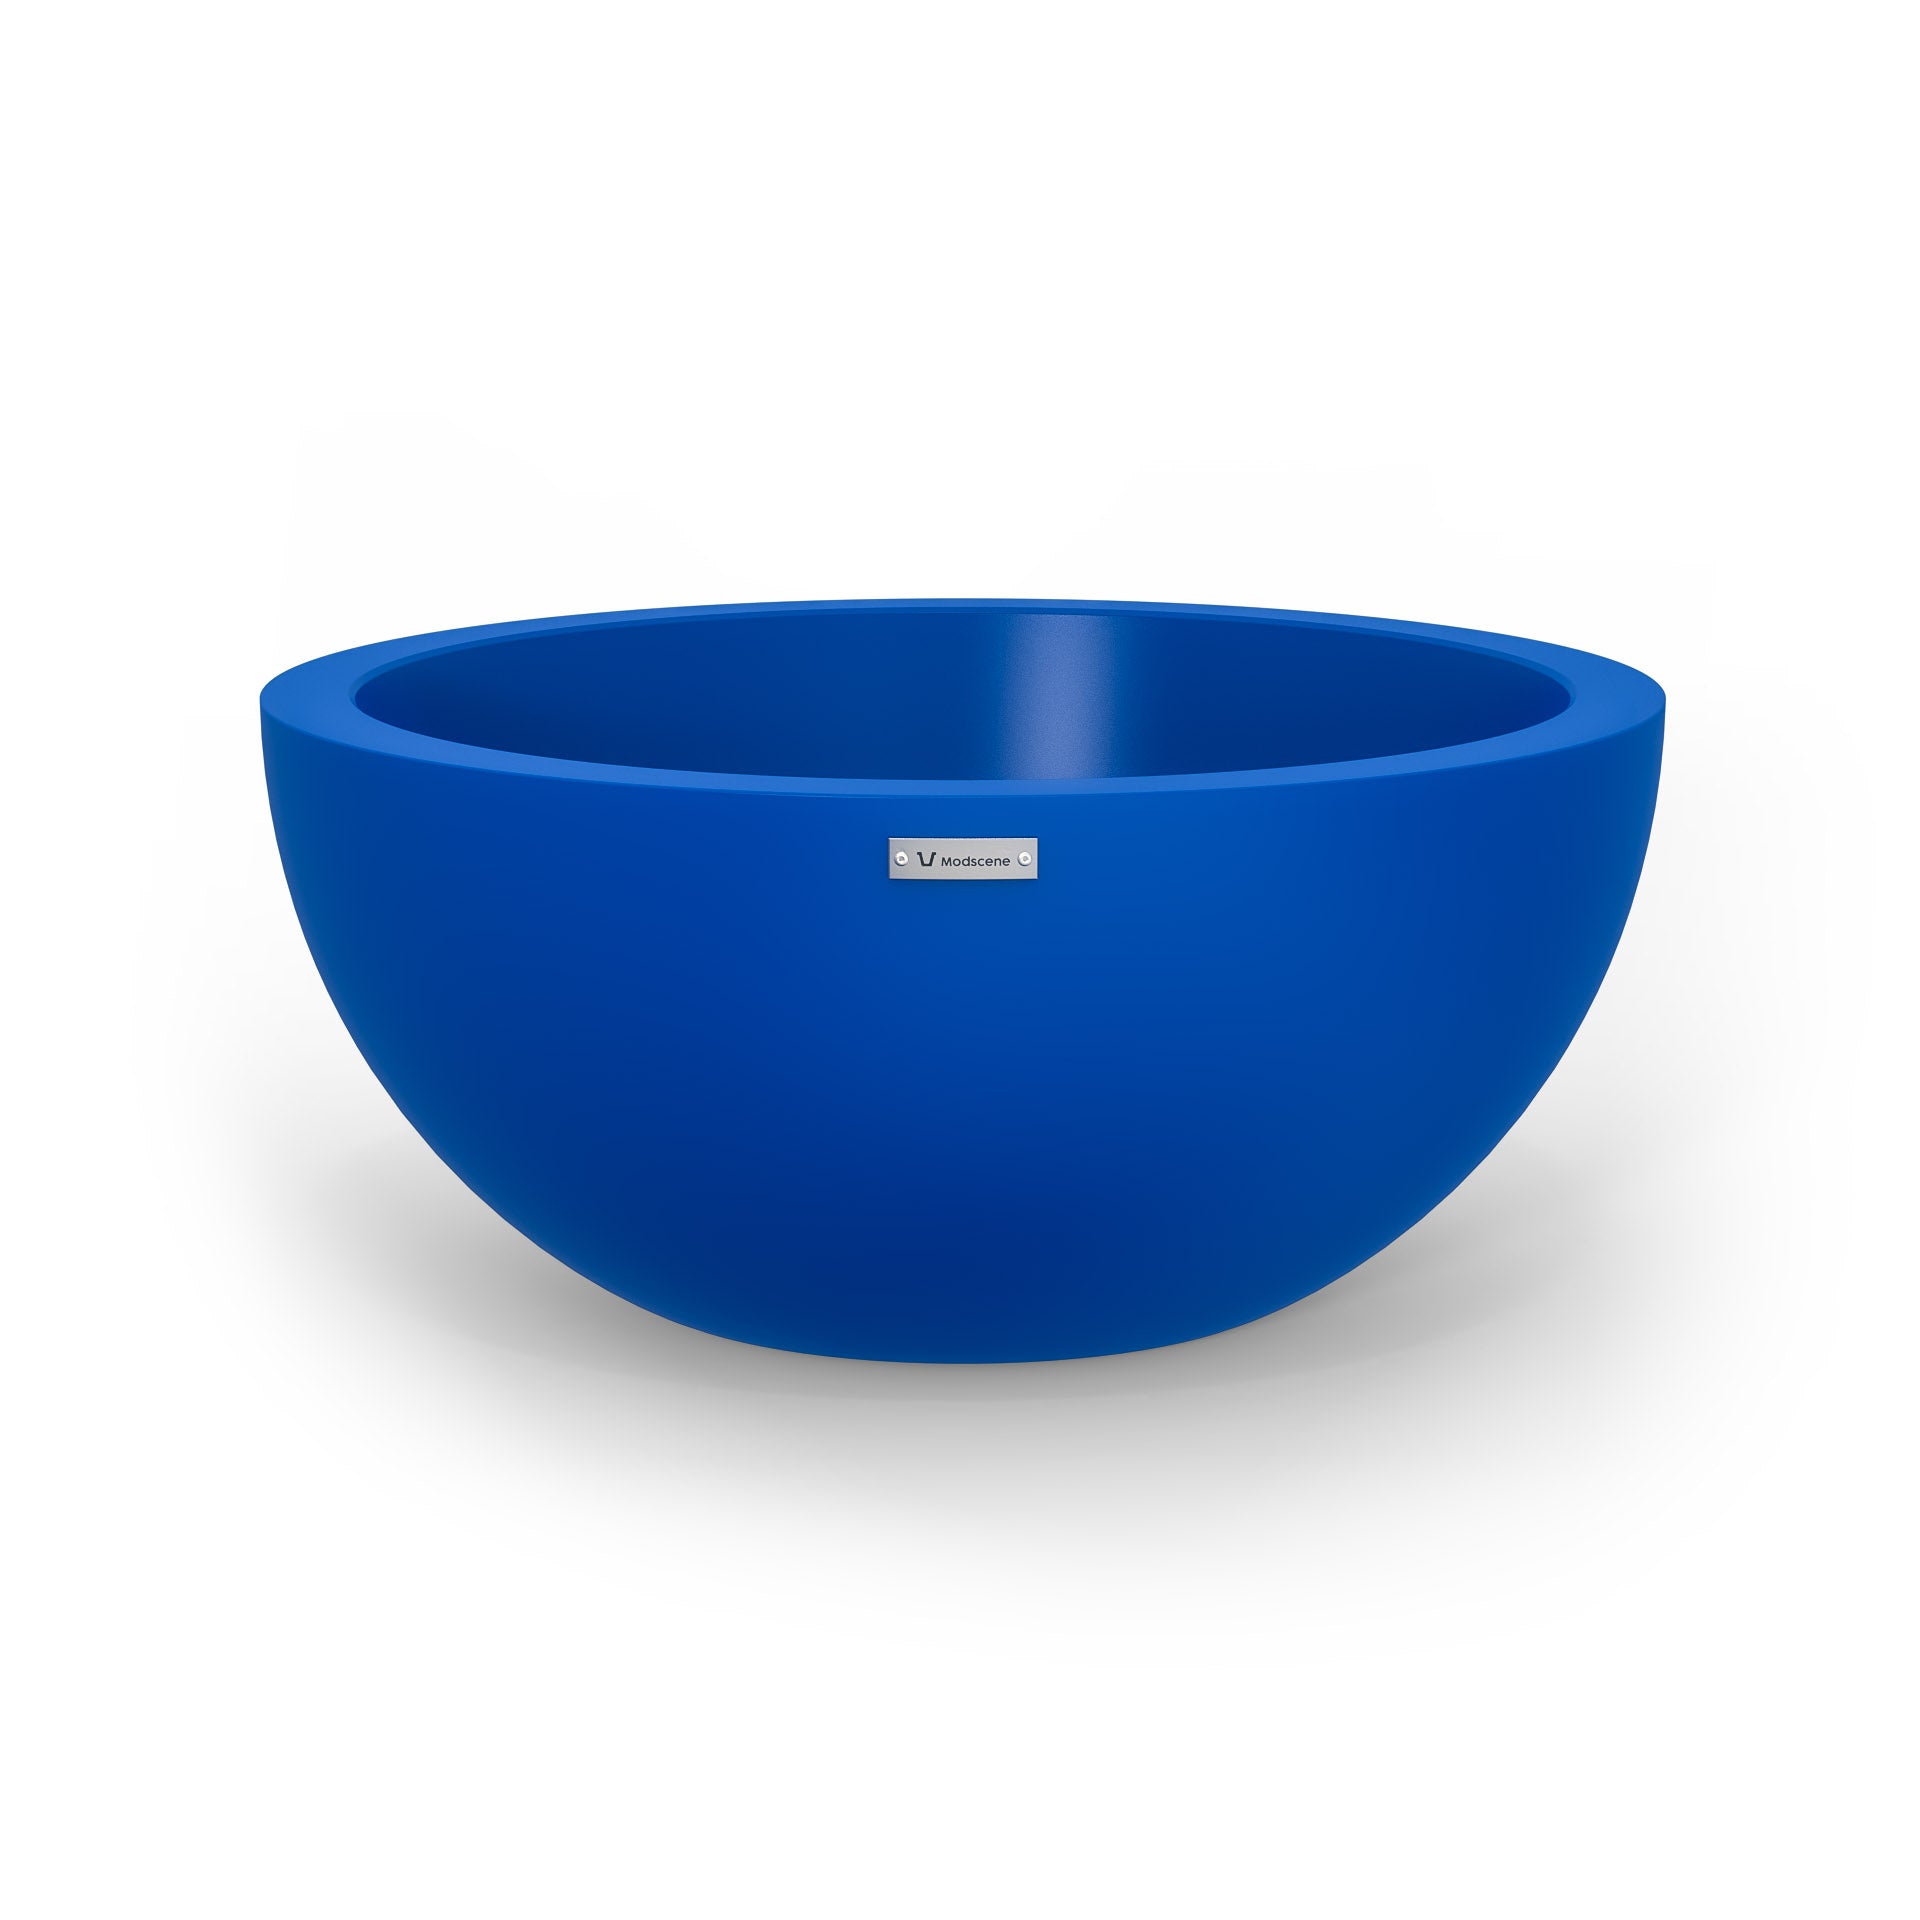 A large planter bowl in a deep blue colour made by Modscene. Australian planters.